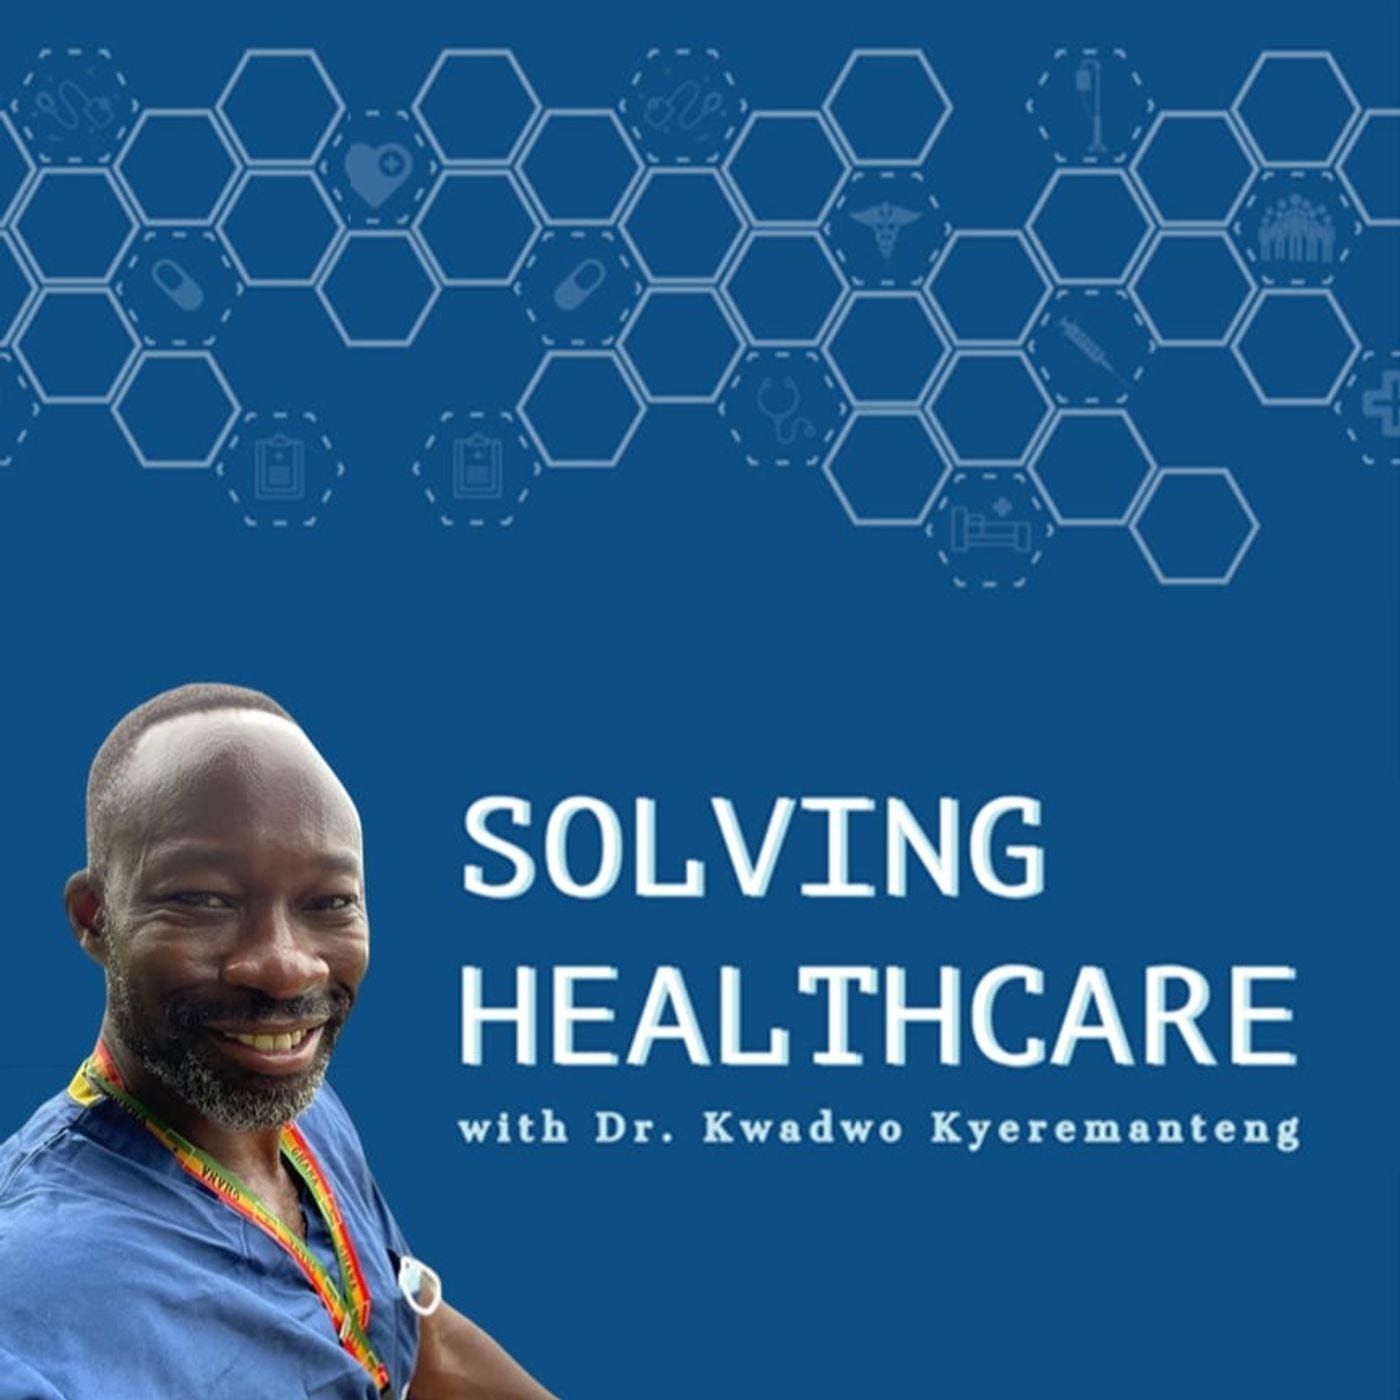 Andre Picard: A Pragmatic Approach to Solving Healthcare